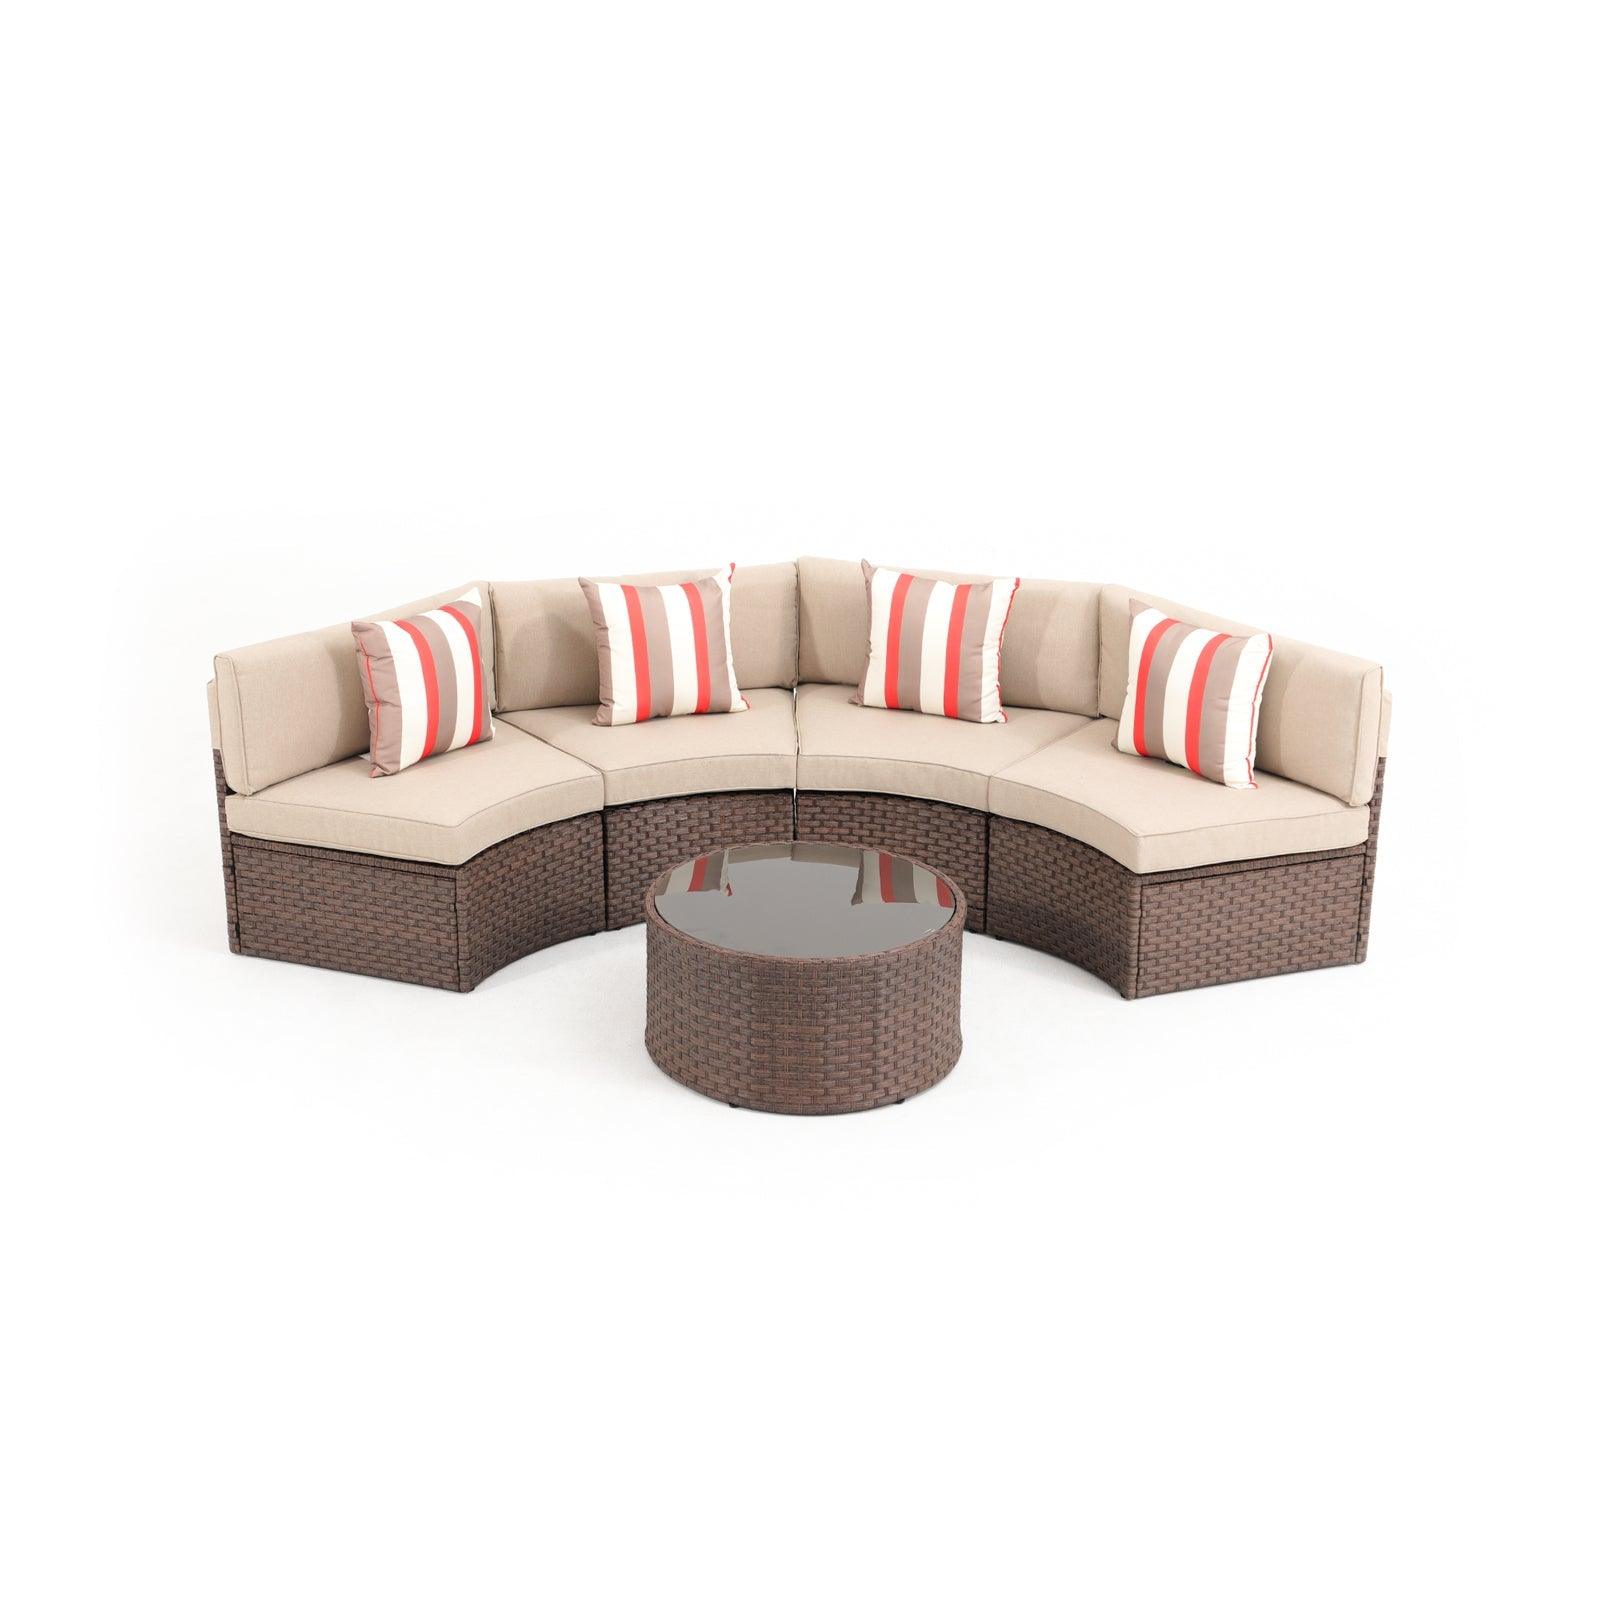 Boboli 5-piece Brown Wicker Curved Sectional Set with beige cushions, 1 Round Glass Table + 4 sectional sofas, front - Jardina Furniture #color_Brown #piece_5-pc.